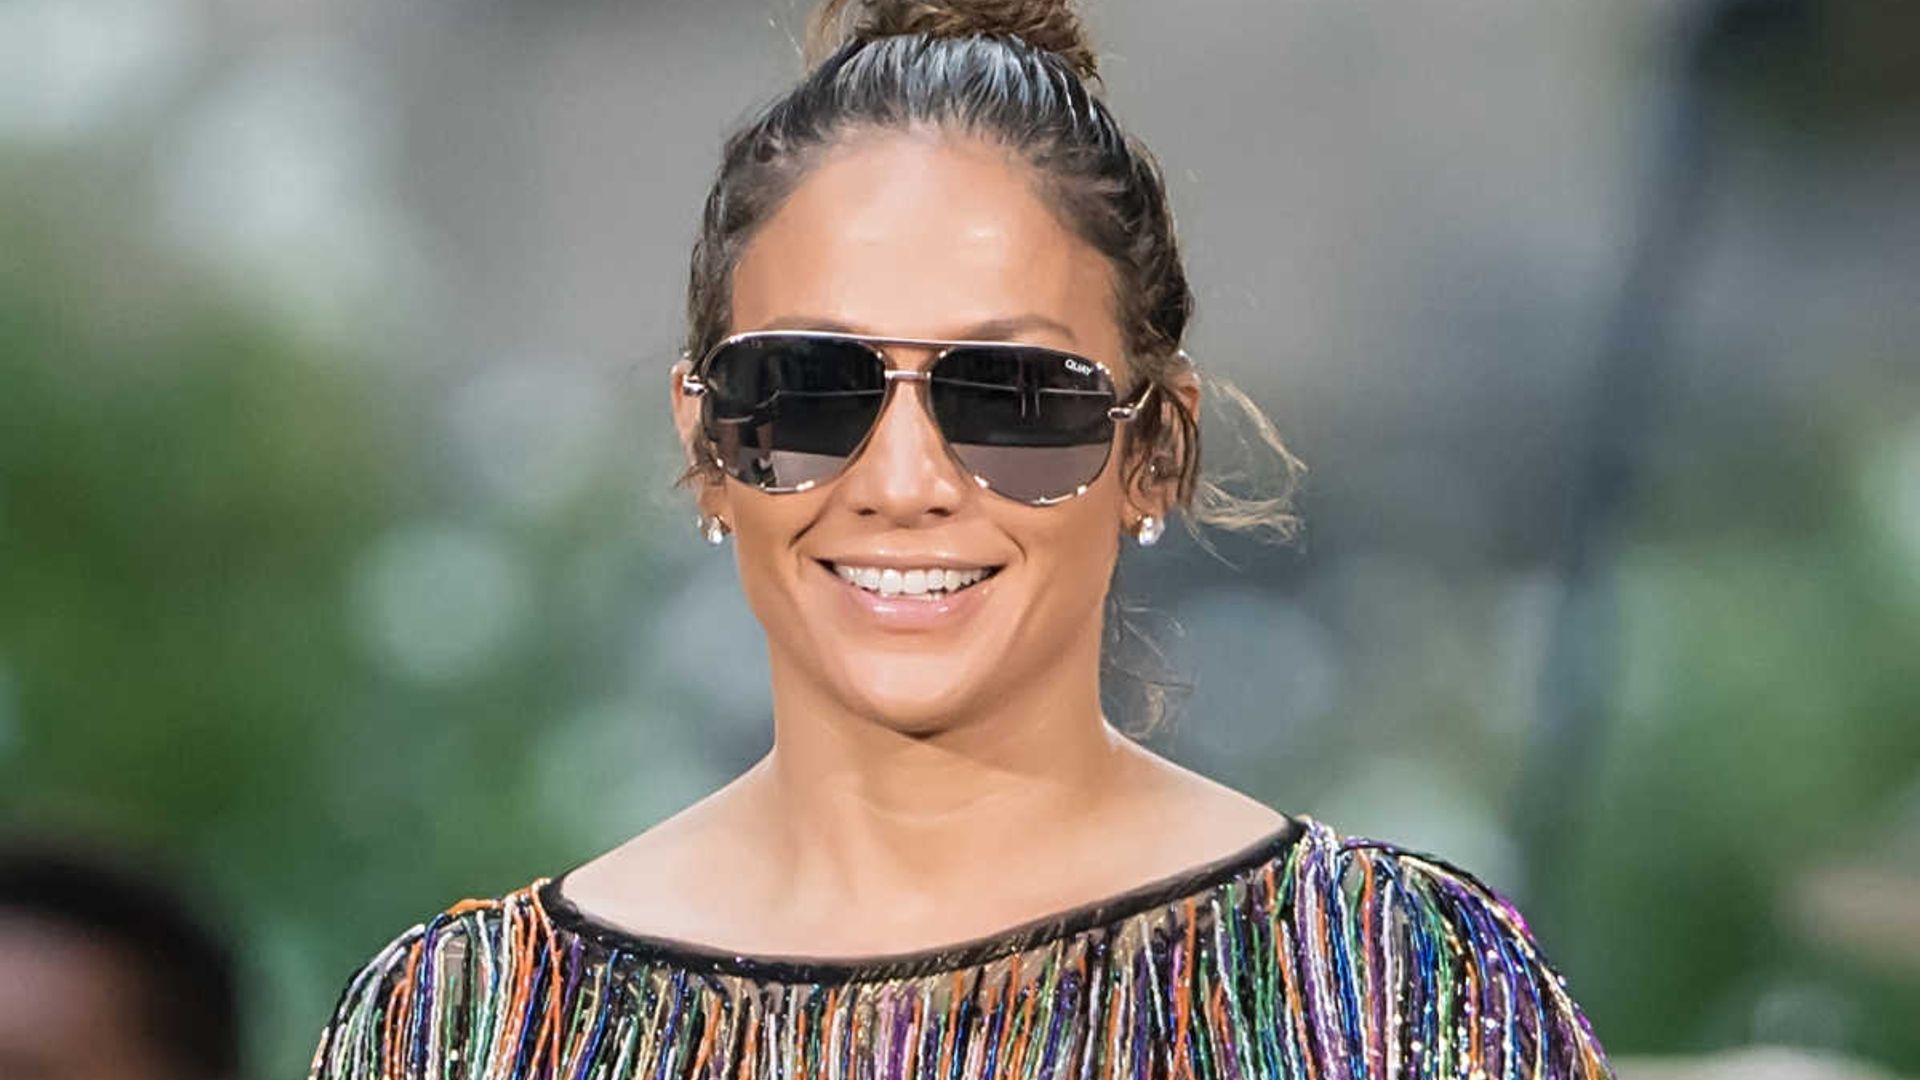 Jennifer Lopez's fave sunglasses are up to 70% off - grab a pair starting from $20